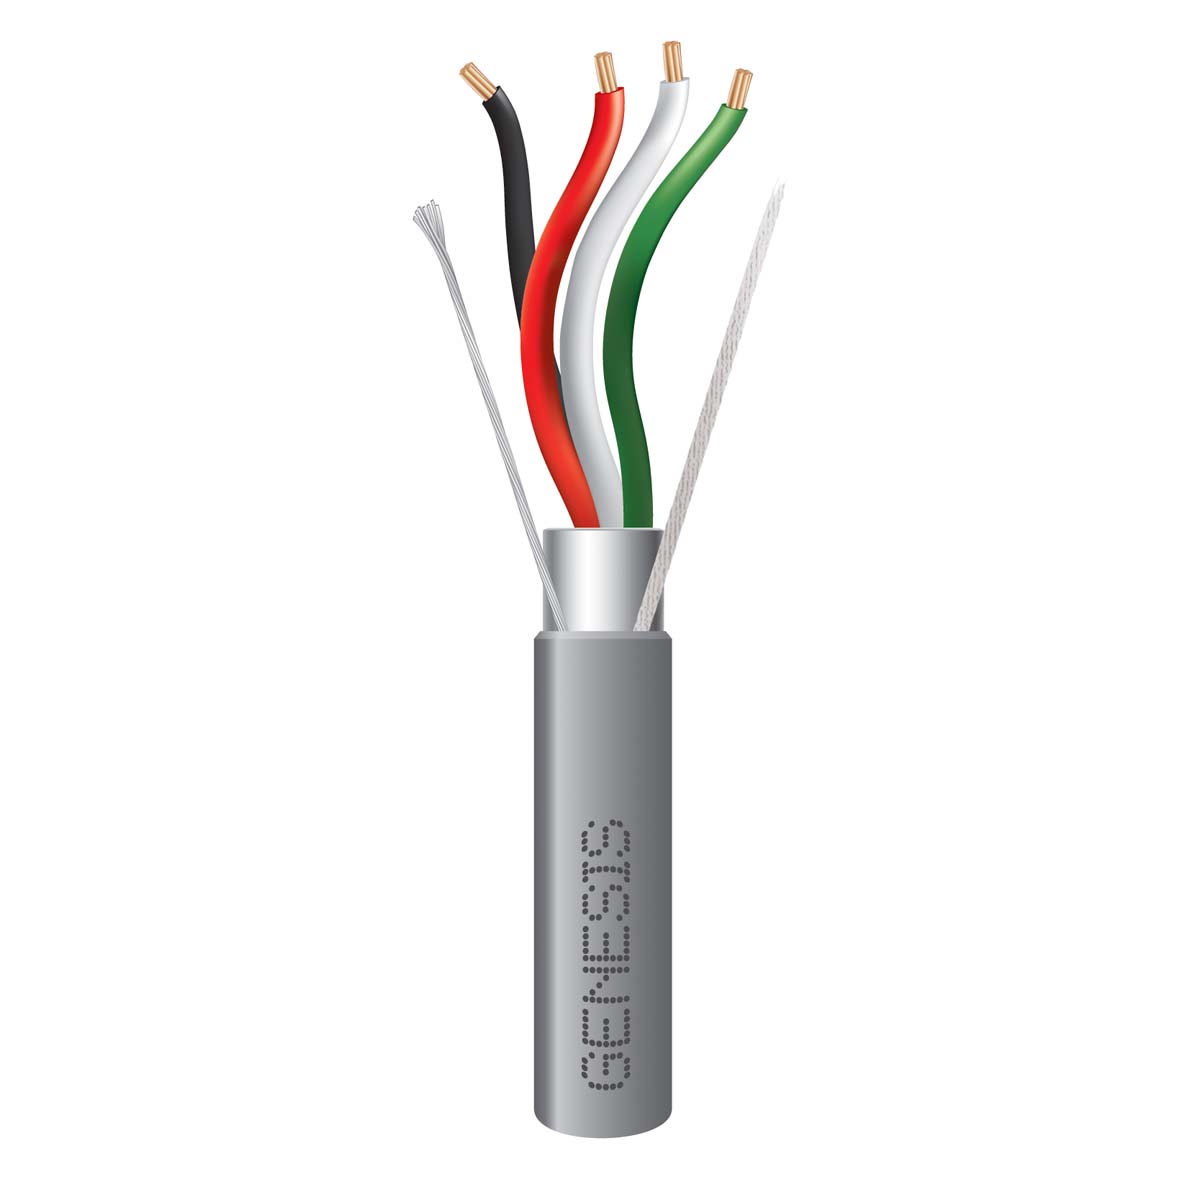 GENESIS CABLE | Cable 18/4 STR
OAS CMR 500&#39; PB Gray Riser
Rated